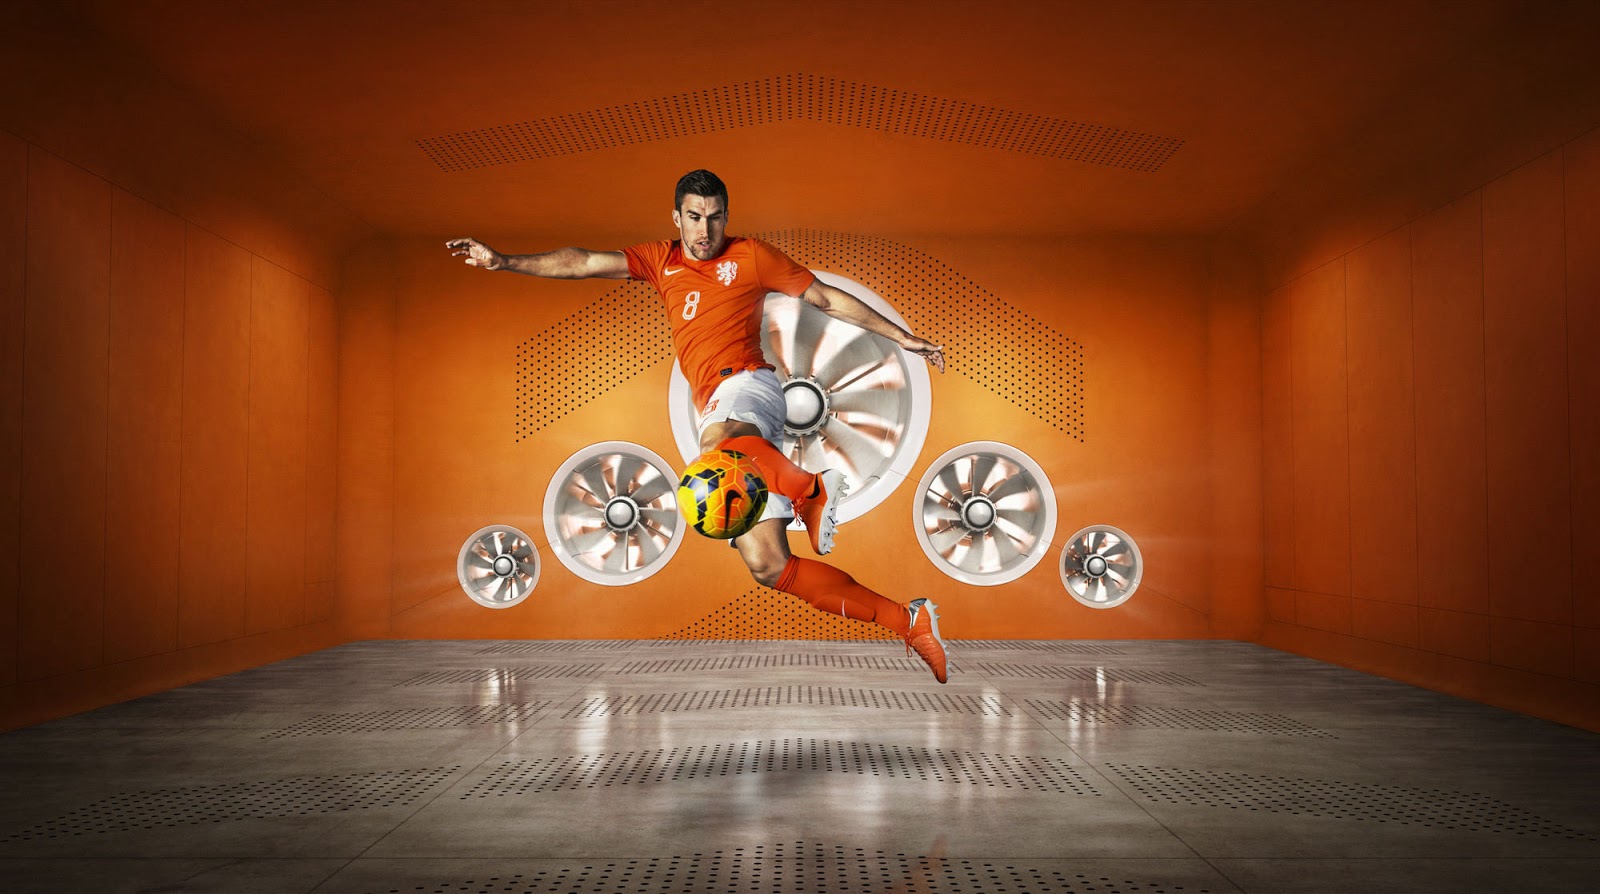 Netherlands+2014+World+Cup+Home+Kit+(1).